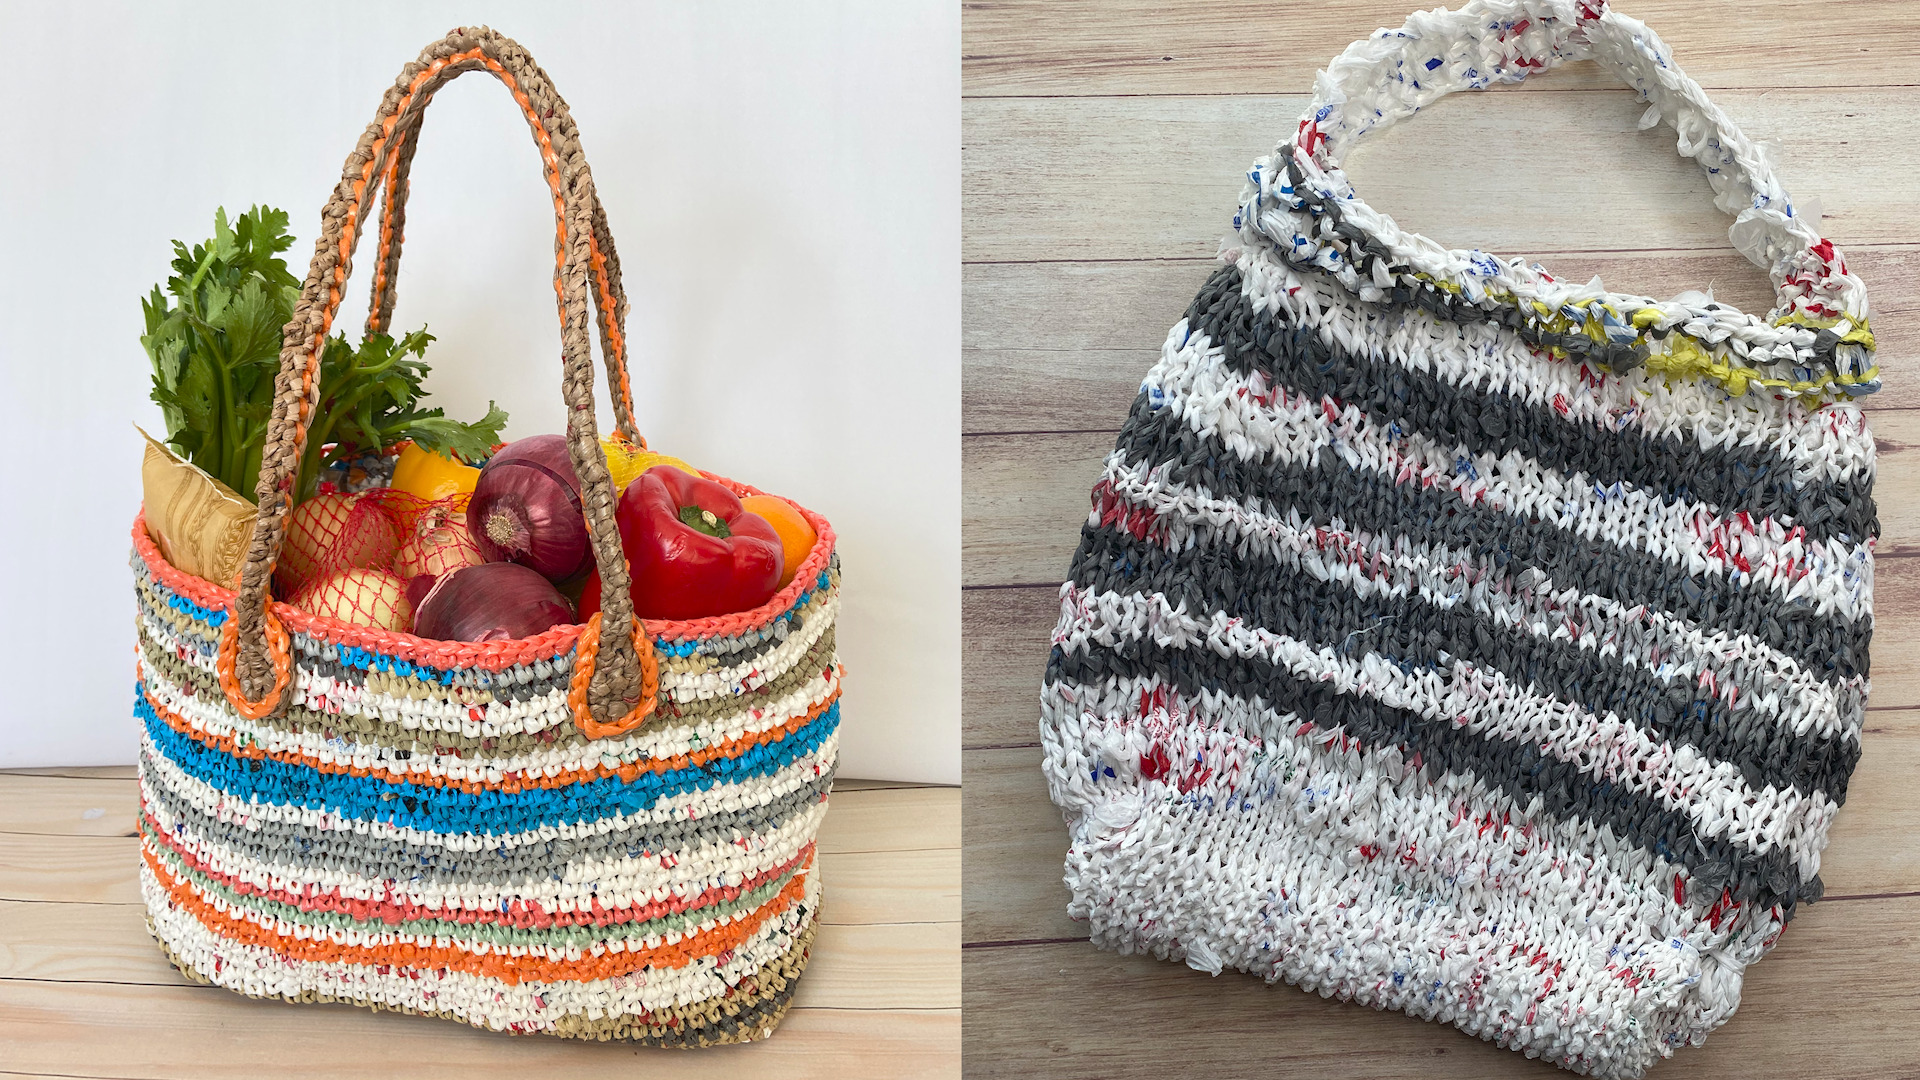 Diy Plastic Bag Tote · A Recycled Tote · Crochet on Cut Out + Keep